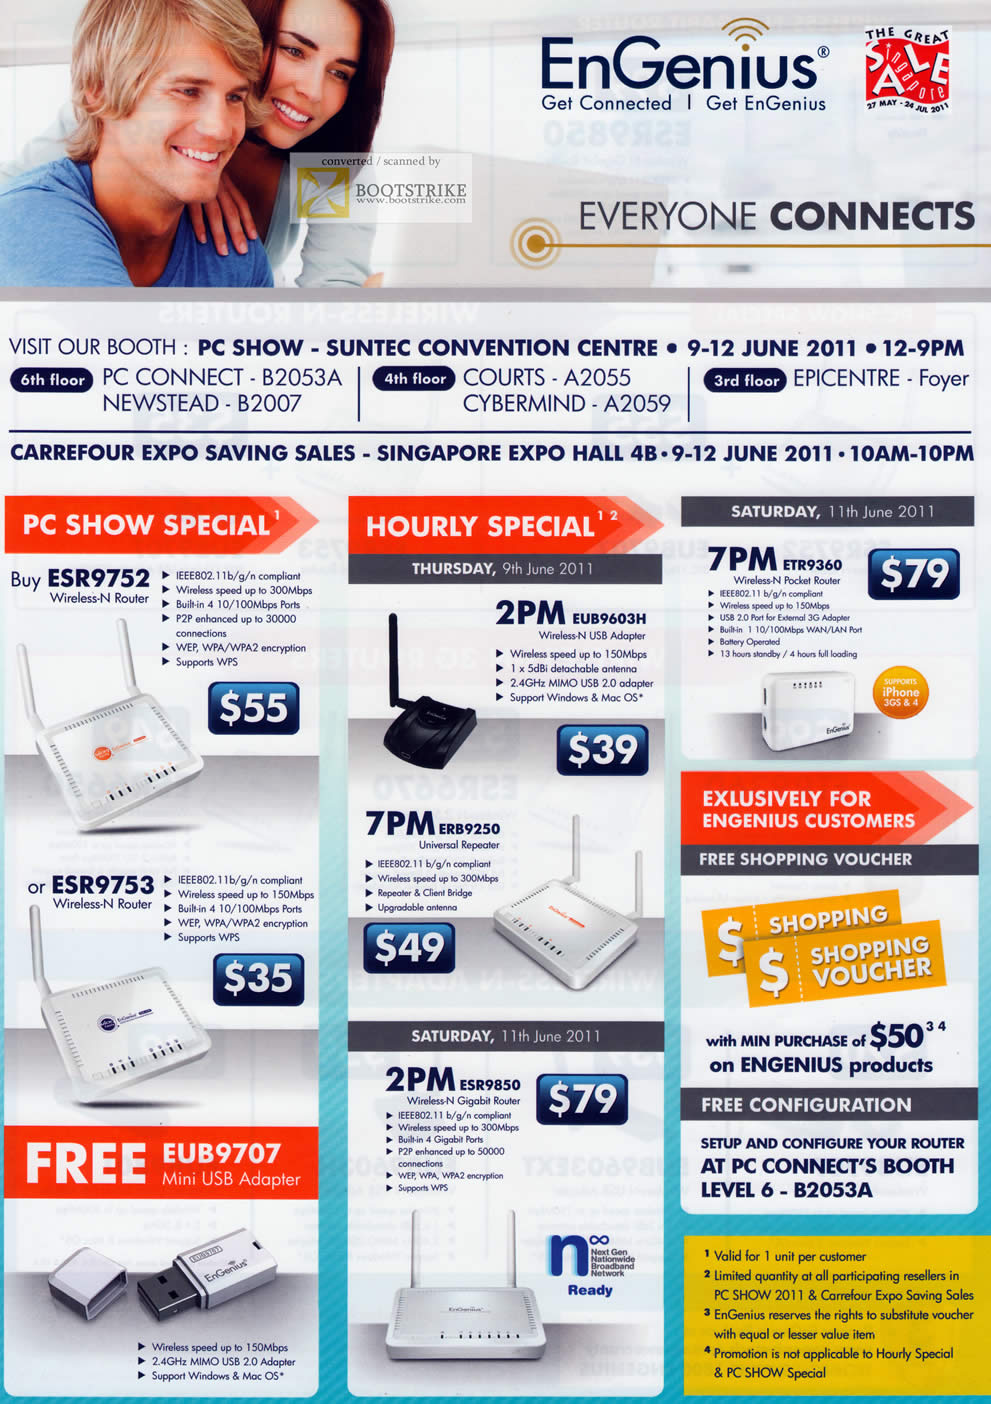 PC Show 2011 price list image brochure of Engenius Networking ESR9752 Wireless Router ESR9753 Hourly Special Shopping Voucher EUB9707